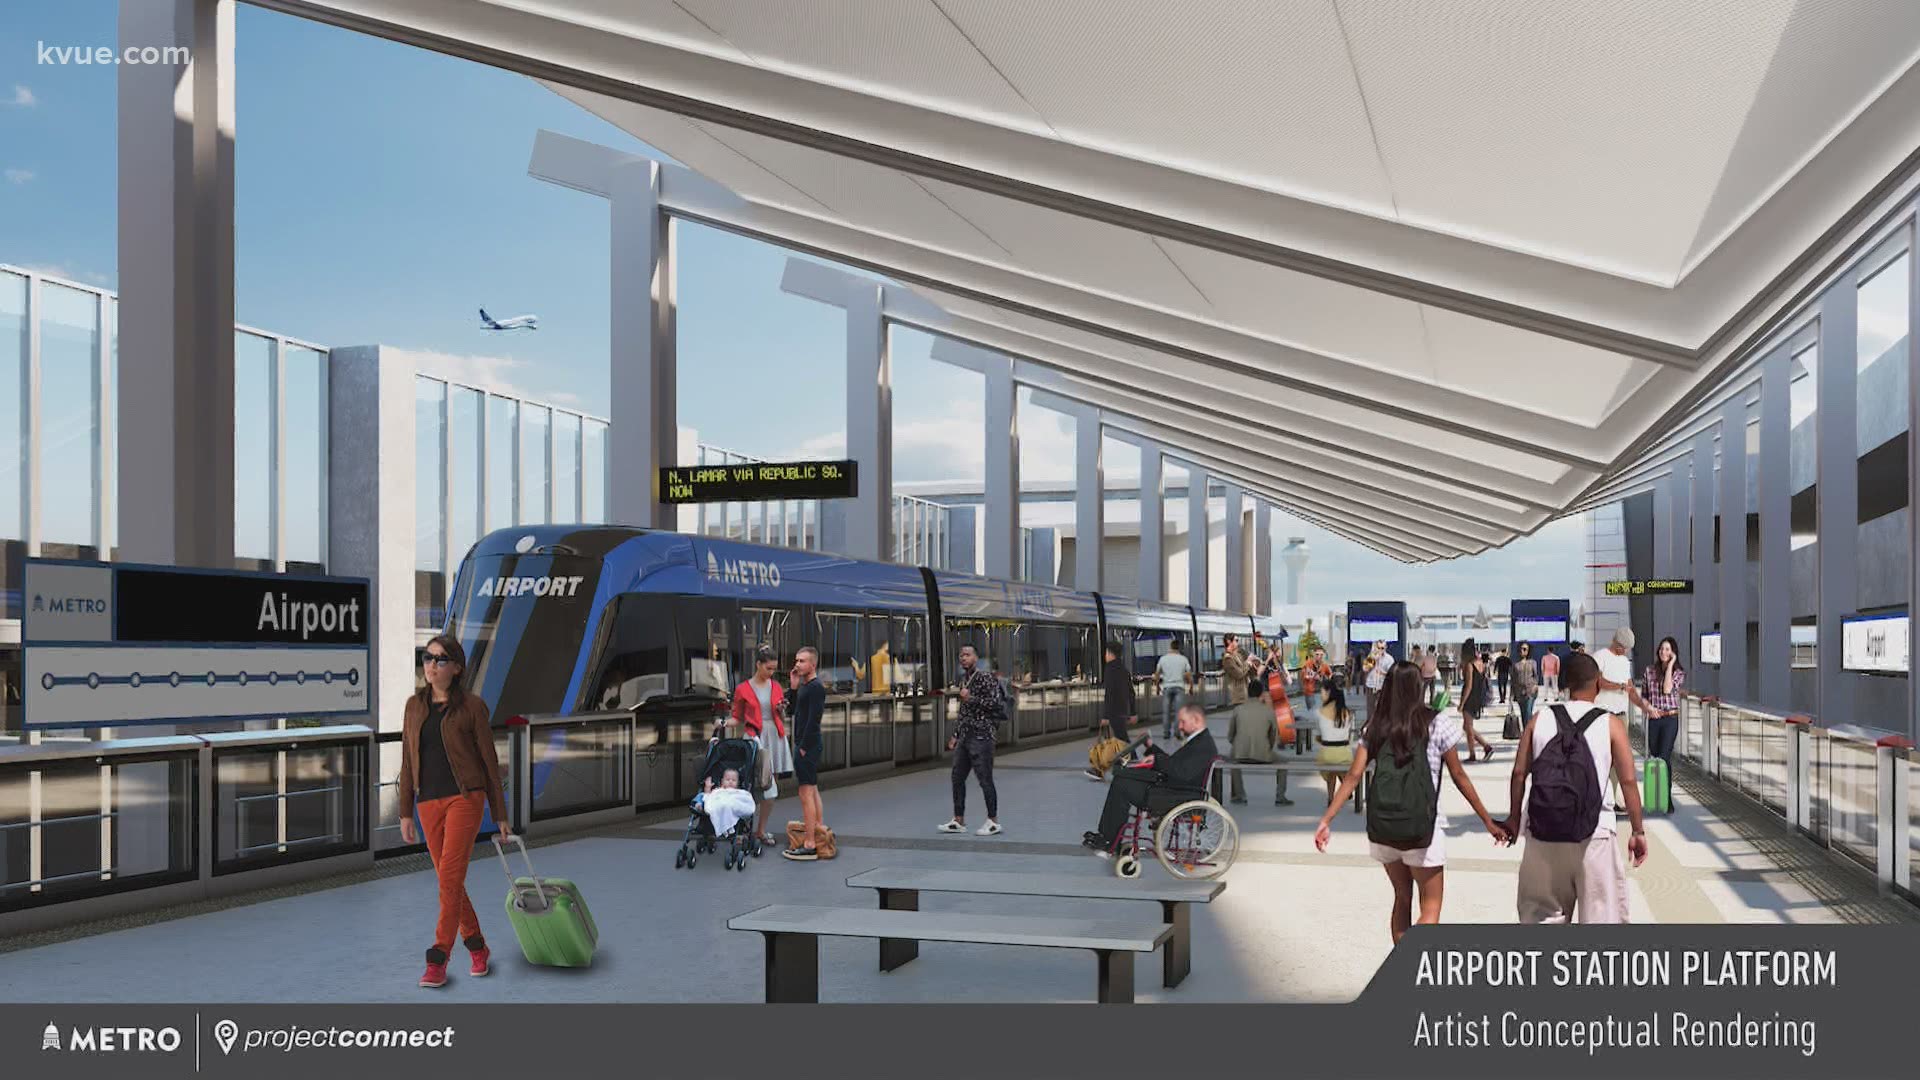 Capital Metro released new renderings of what the light rail stations at Austin FC Stadium and the Austin airport would look like.